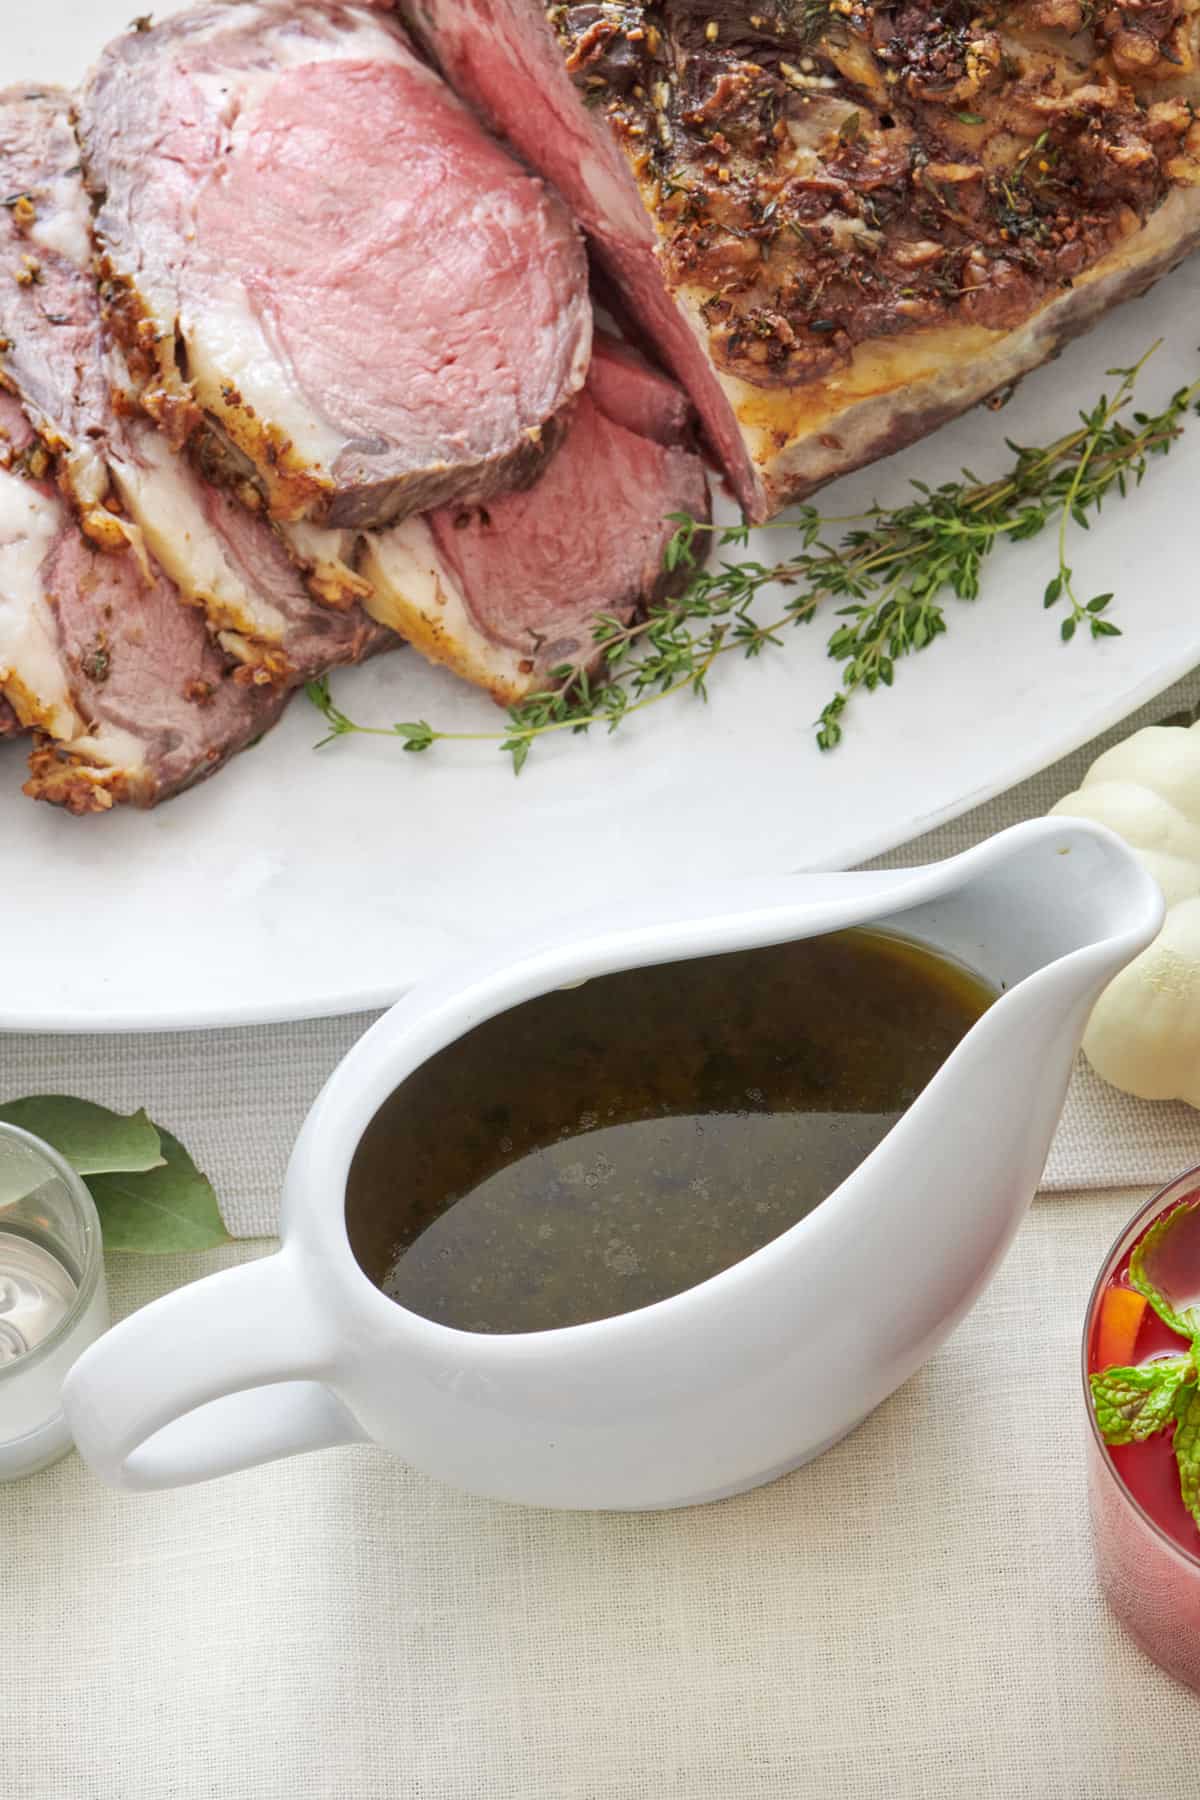 Au jus in a gravy boat next to prime rib.